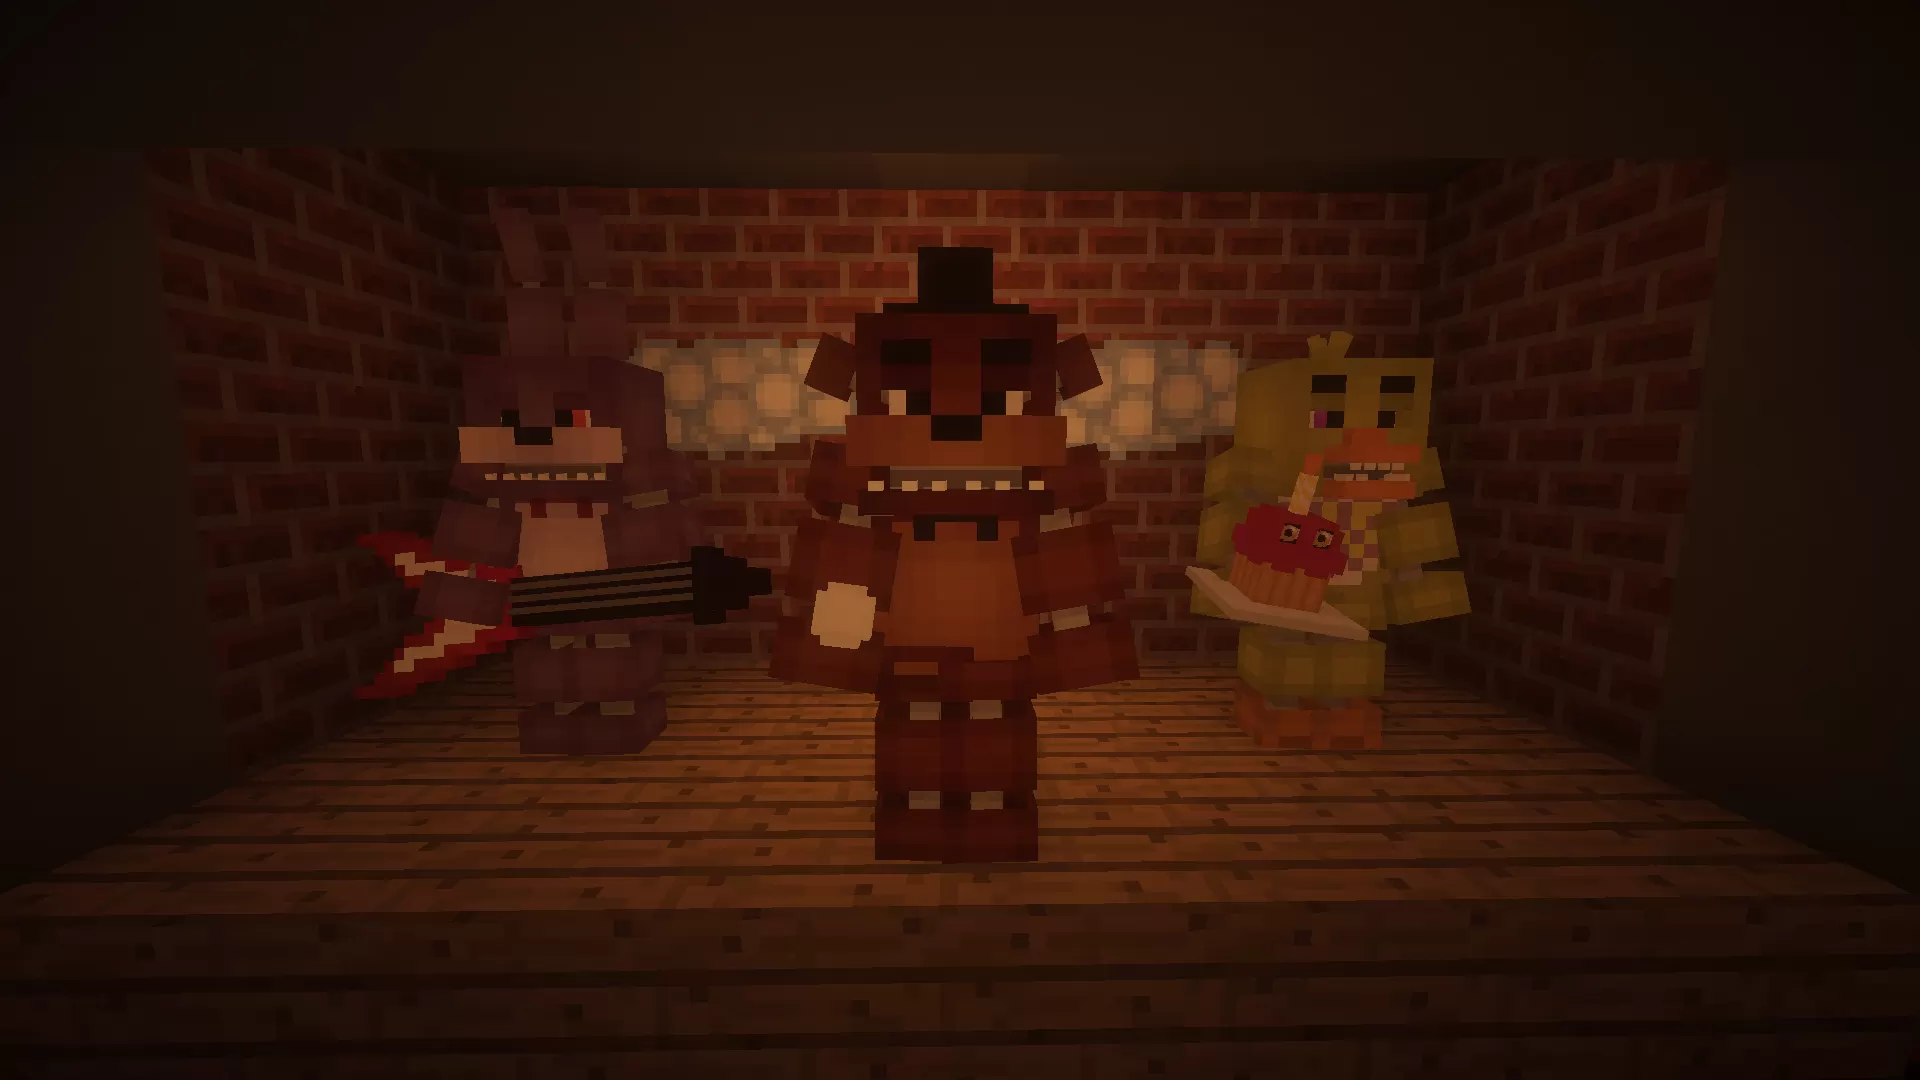 How To Build Five Nights at Freddy's Map in Minecraft - Part 1 (Fnaf 1 Map)  